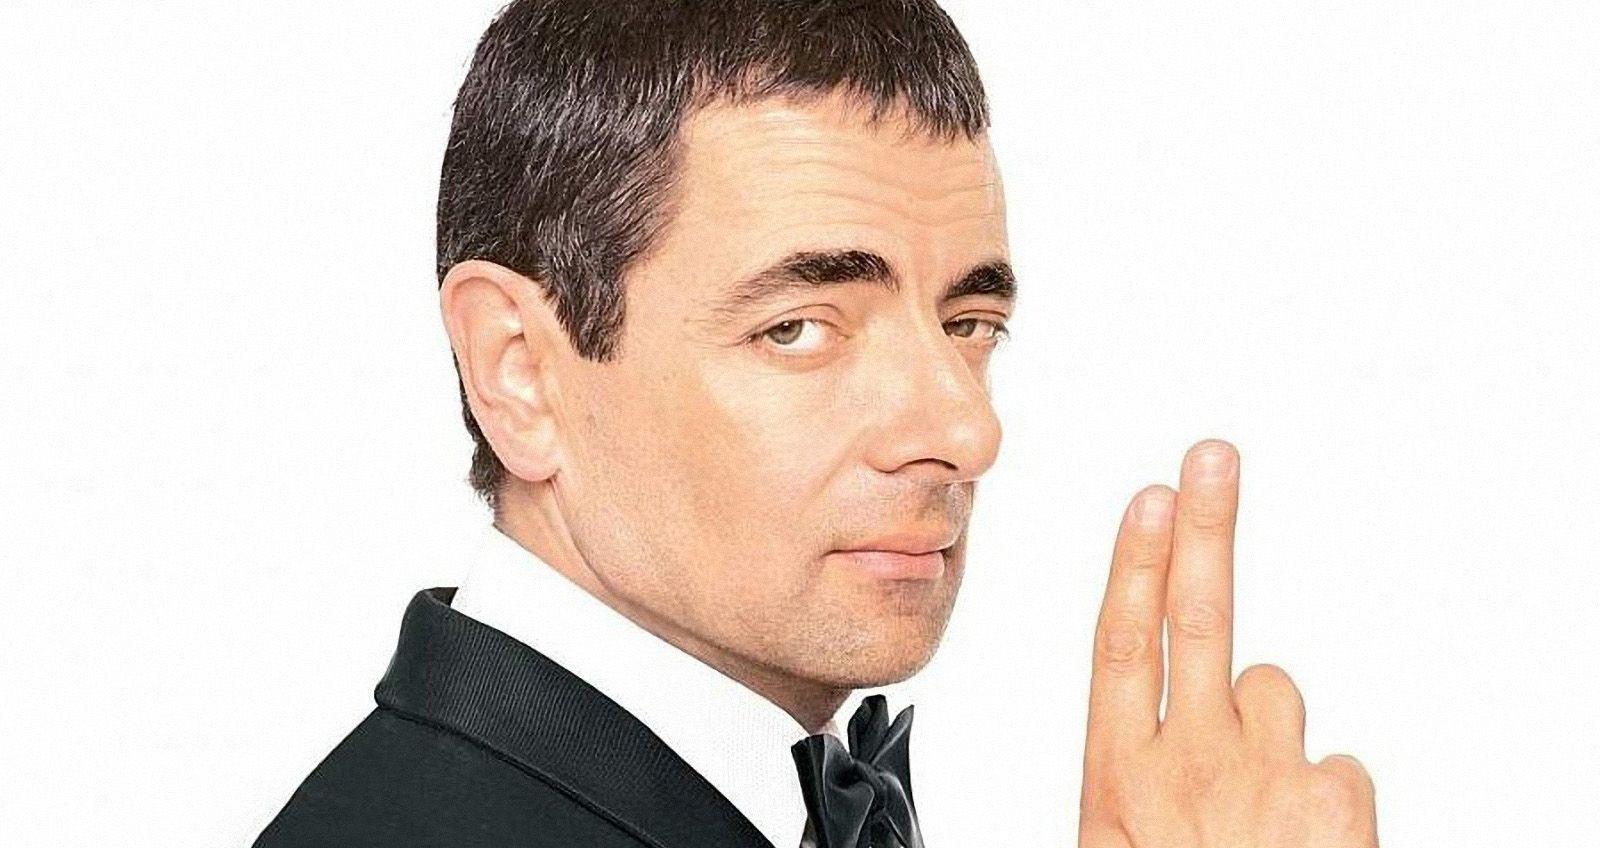 Things You Didn't Know About Rowan Atkinson